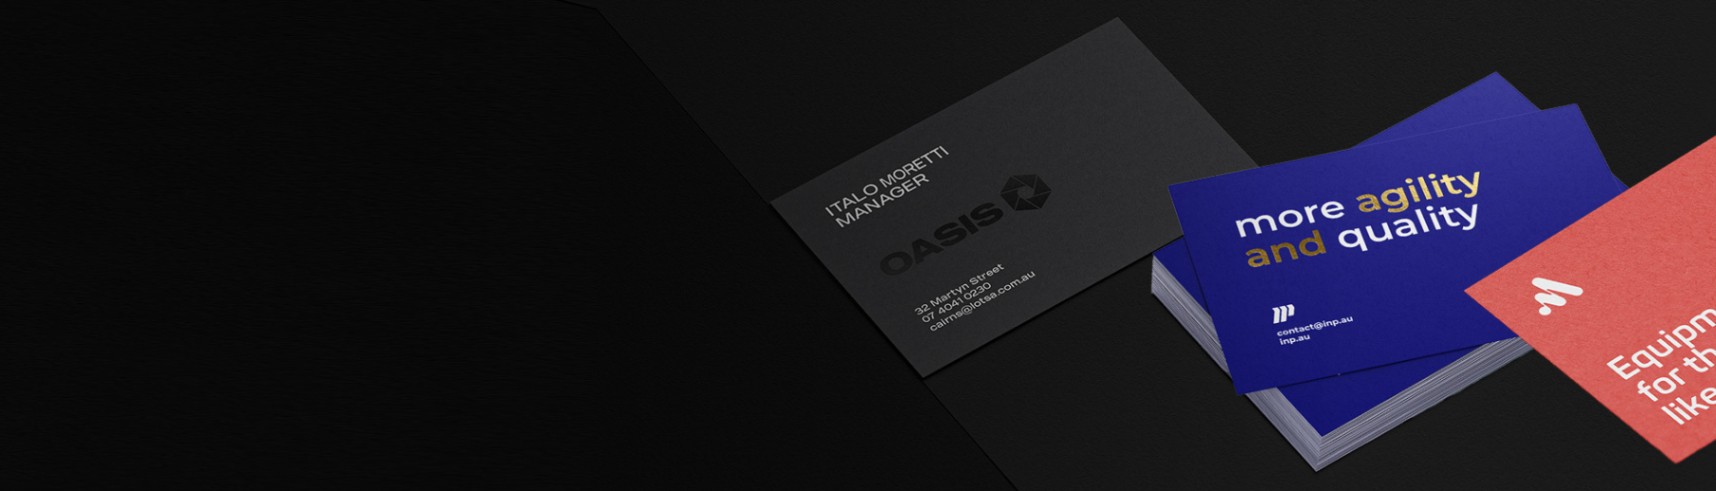 Assorted business cards on a black background with different finishes